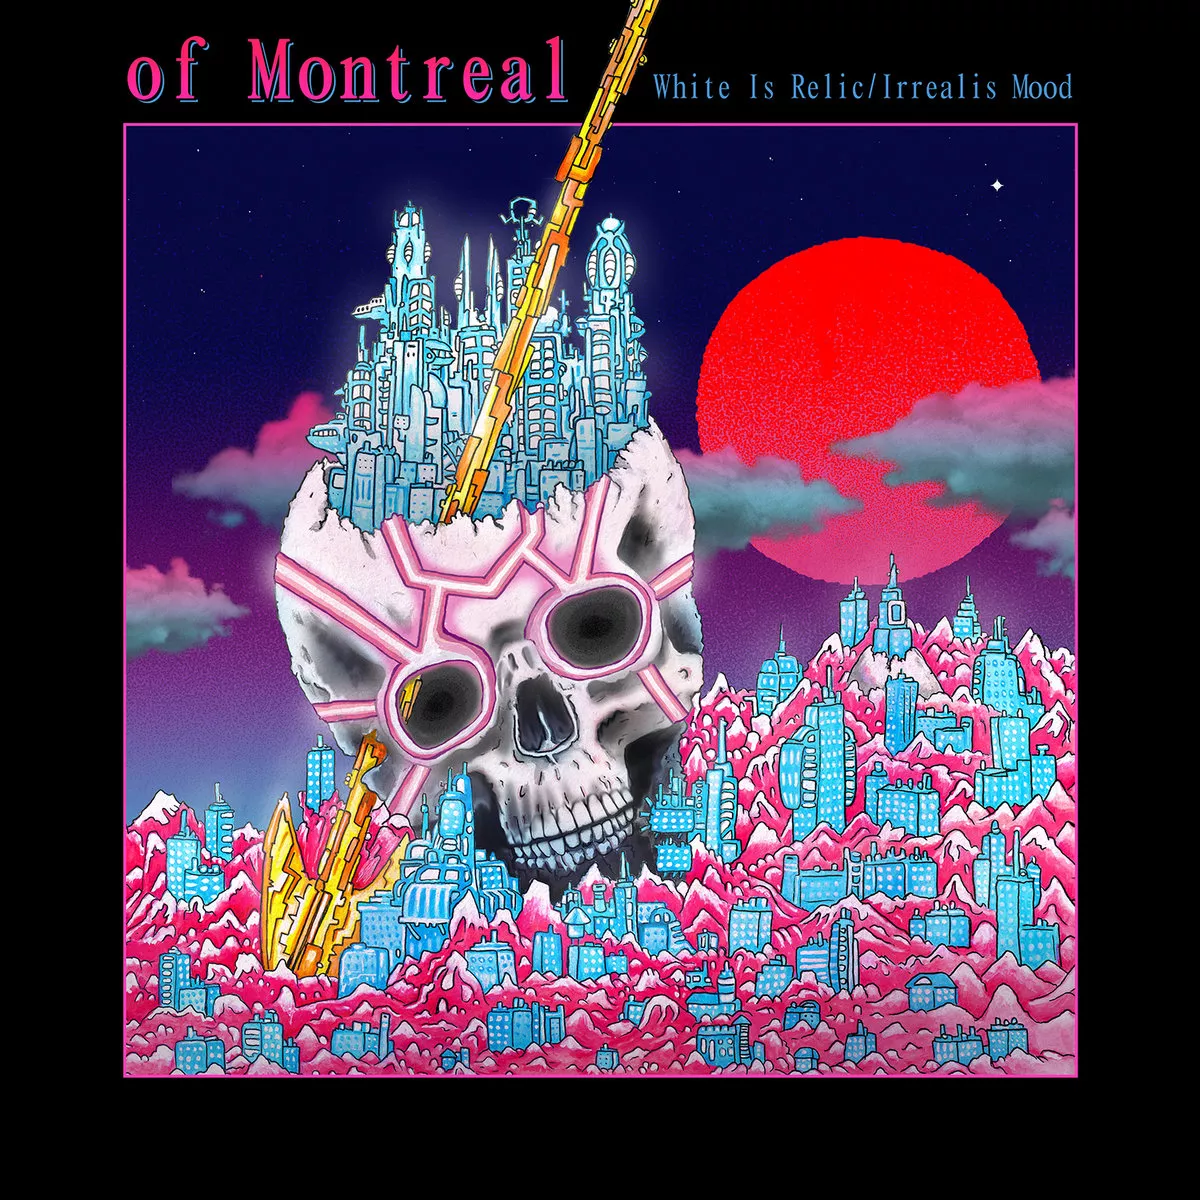 White Is Relic/Irrealis Mood - of Montreal